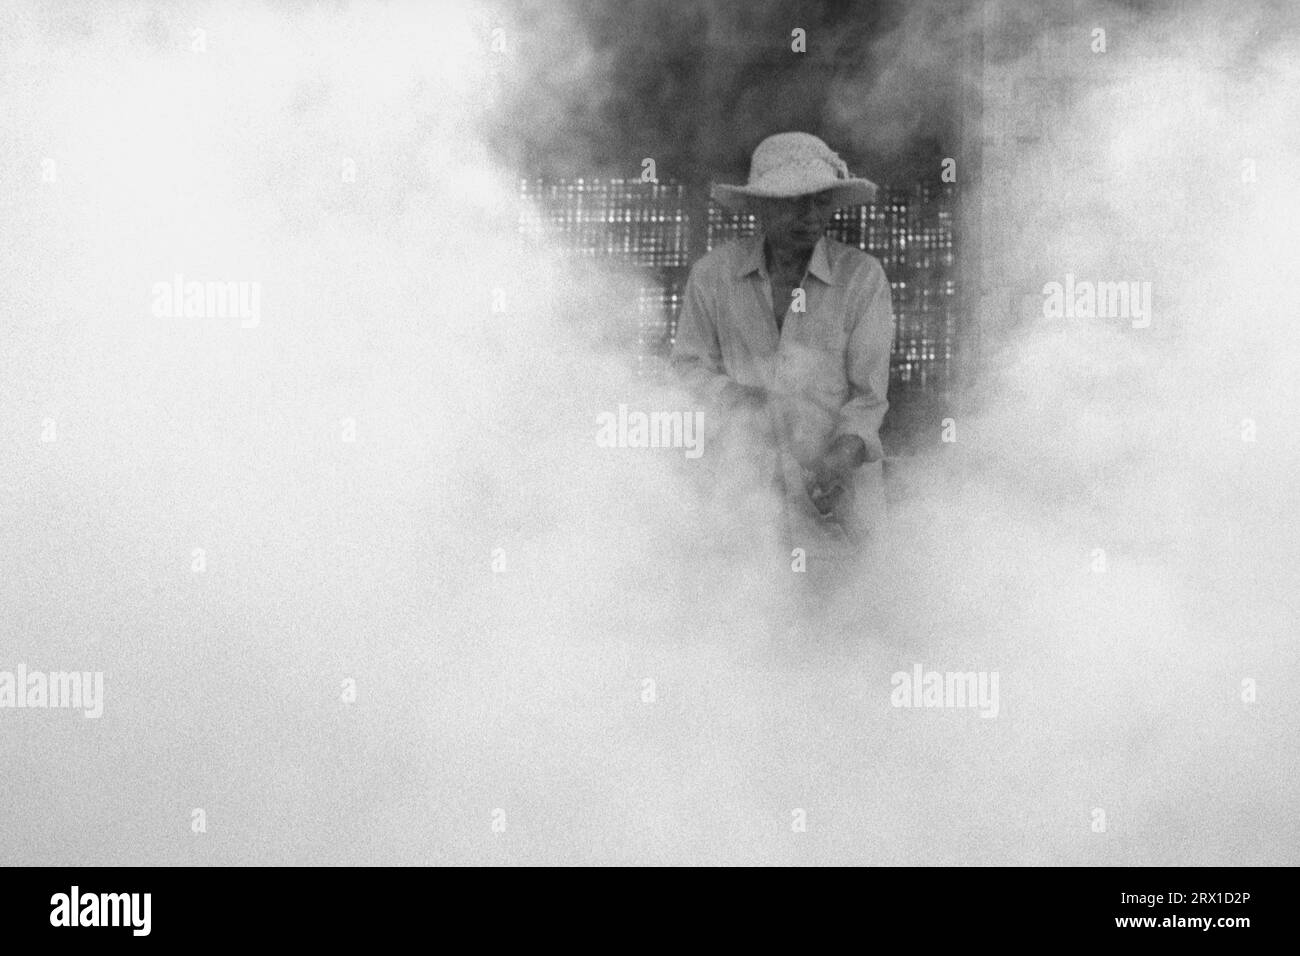 Portrait of a local Balinese farmer surrounded by smoke Stock Photo